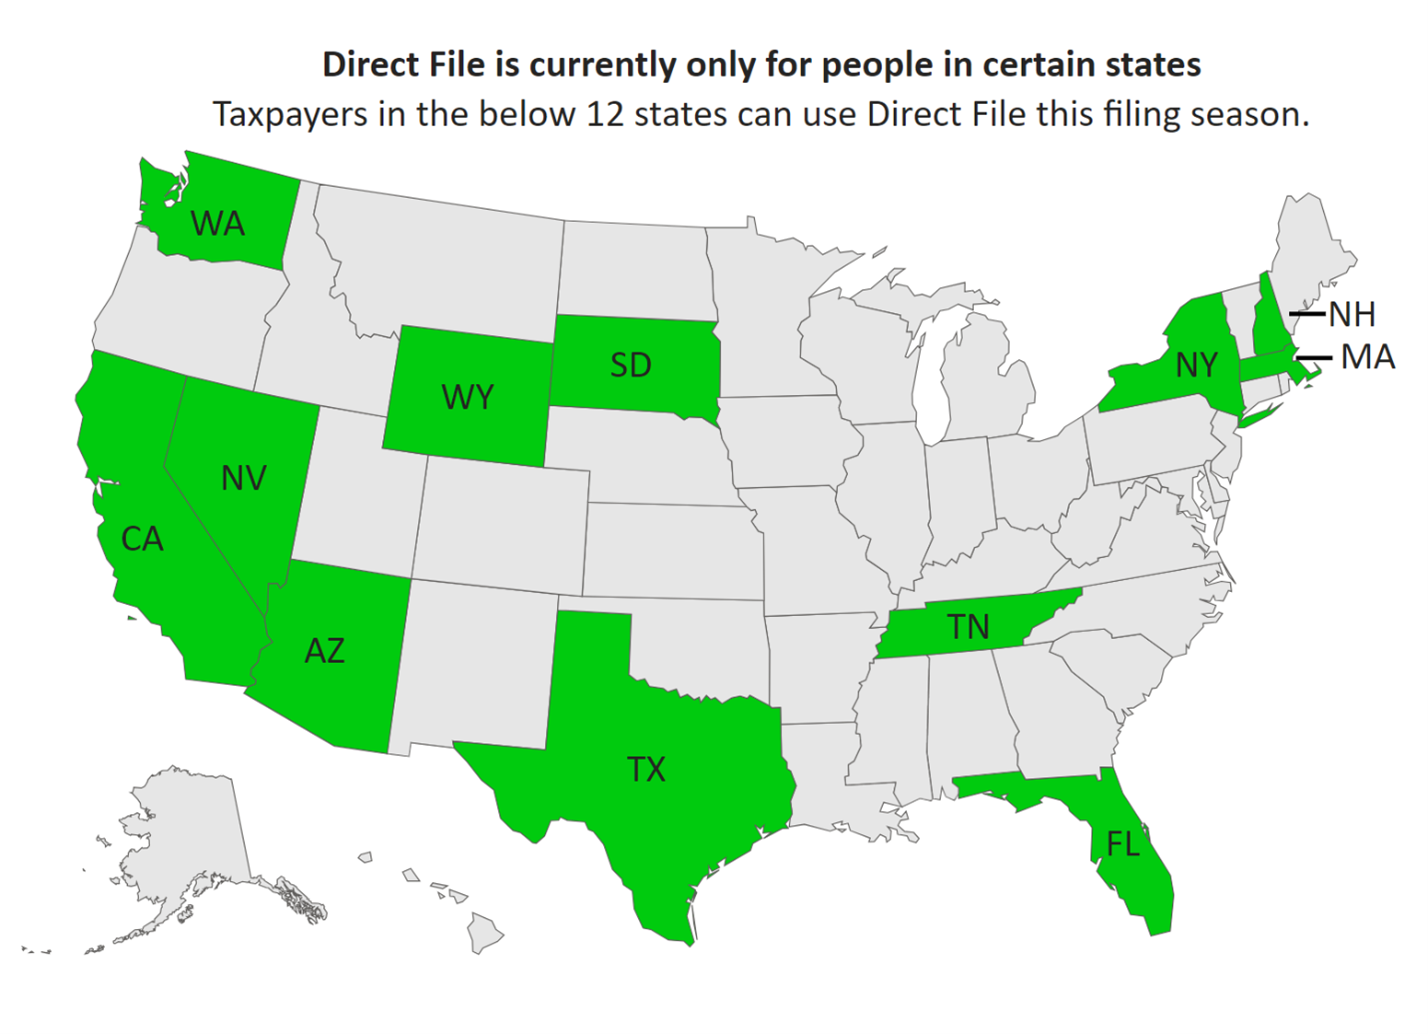 United States map image with the following states highlighted in green: Arizona, California, Florida, Massachusetts, New Hampshire, New York, Nevada, South Dakota, Tennessee, Texas, Washington, and Wyoming. Text in the image reads "Direct File is currently only for people in certain states. Taxpayers in the below 12 states can use Direct File this filing season.